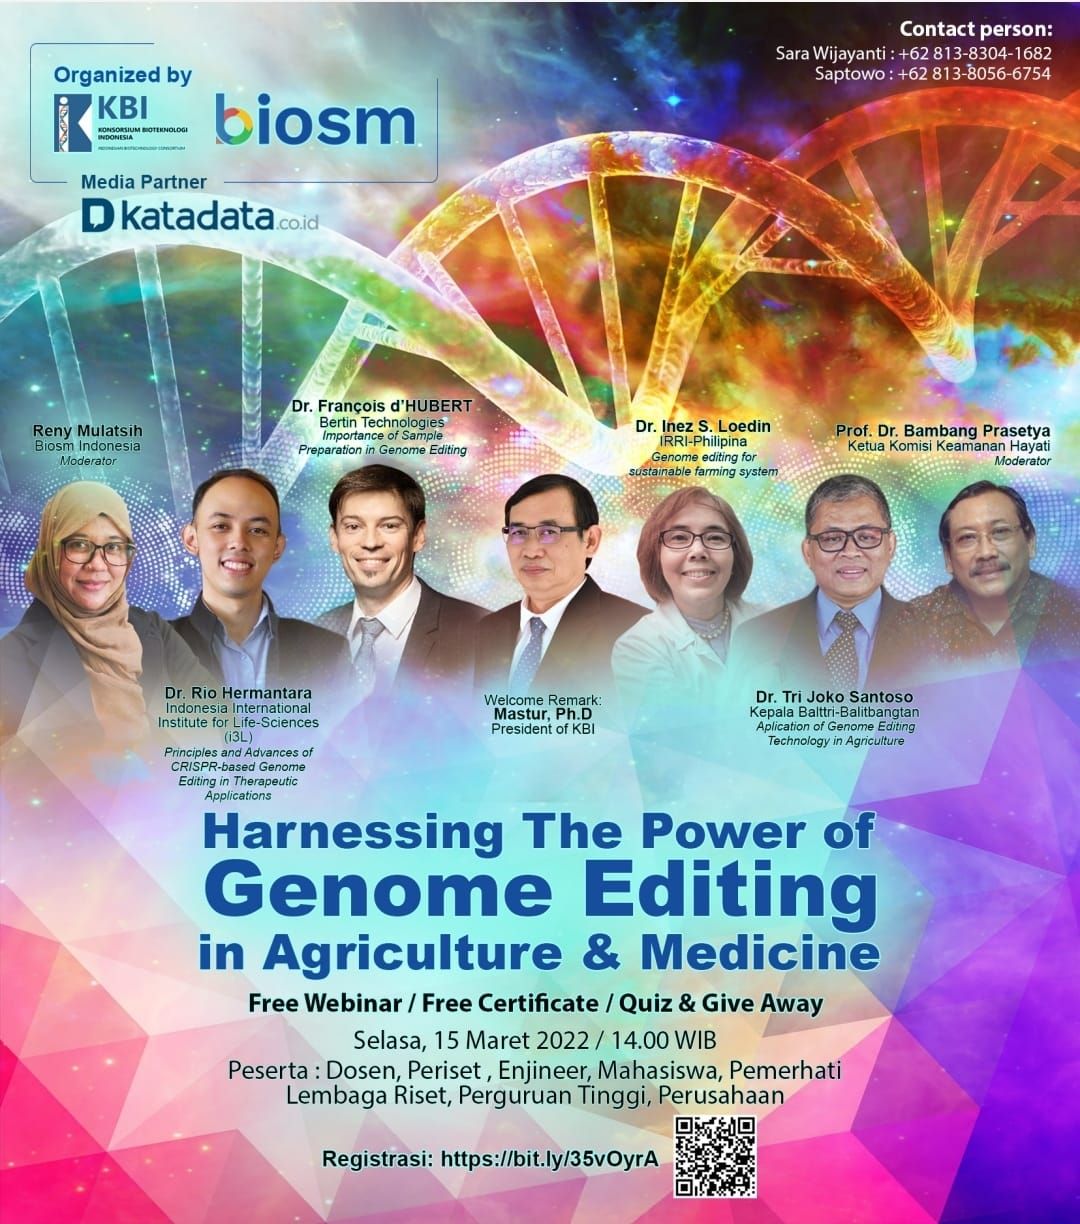 Webinar “Harnessing The Power of Genome Editing in Agriculture and Medicine”